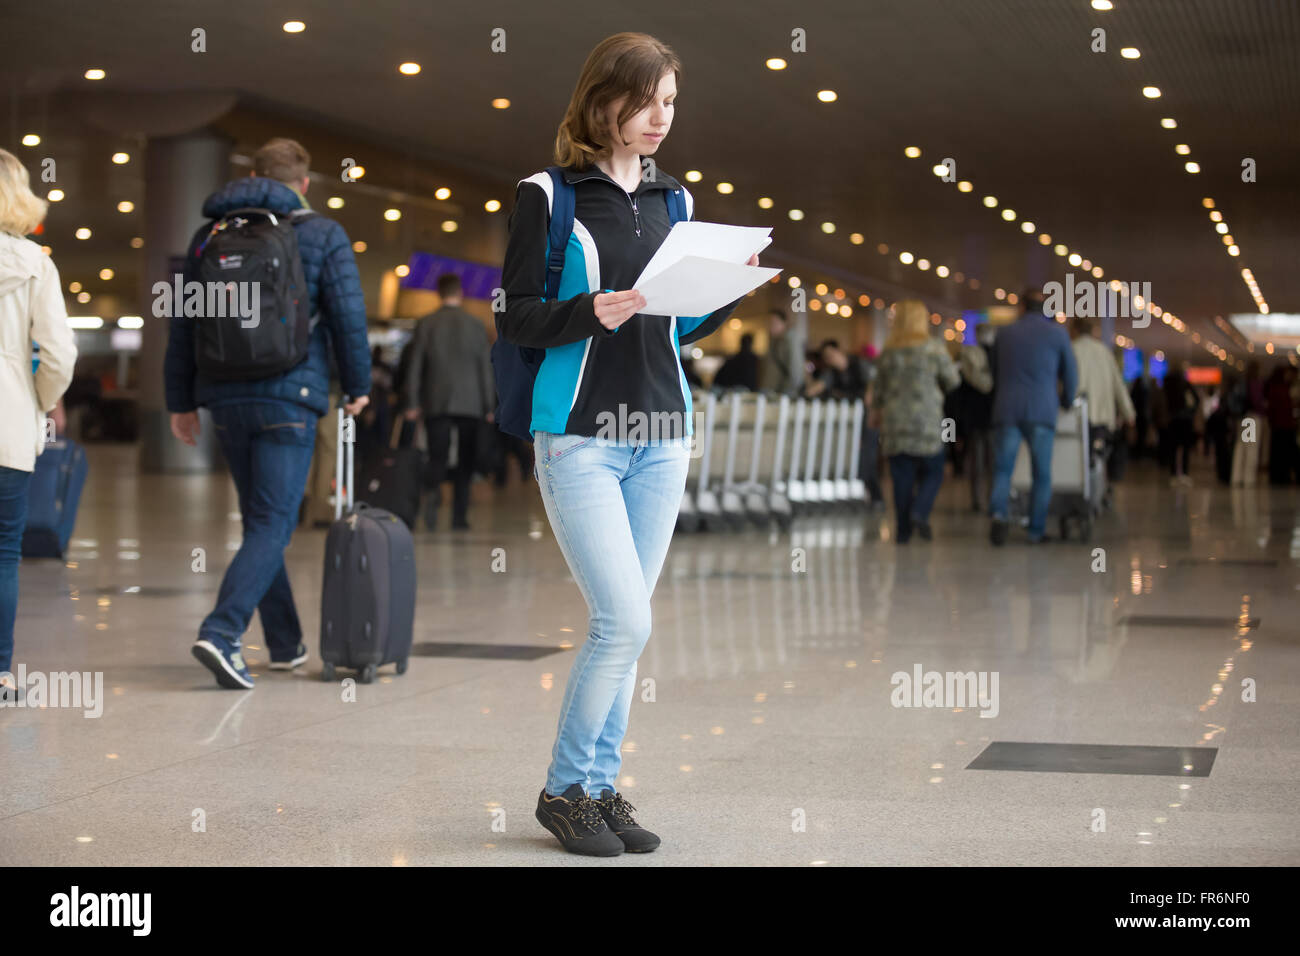 Portrait of young woman with backpack standing in airport terminal, with printed electronic tickets, using cell phone to check i Stock Photo